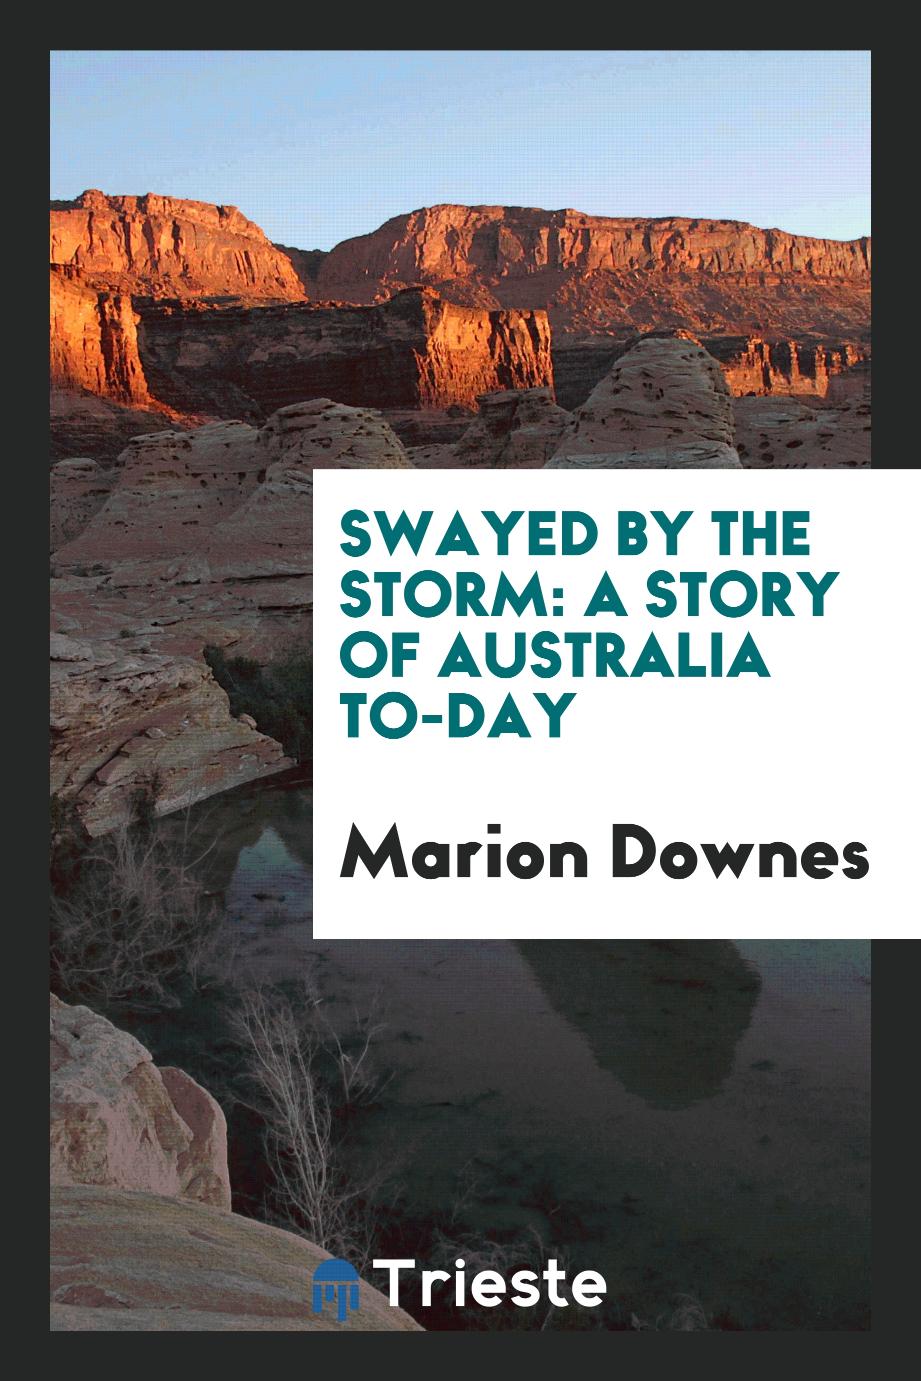 Swayed by the storm: a story of Australia to-day